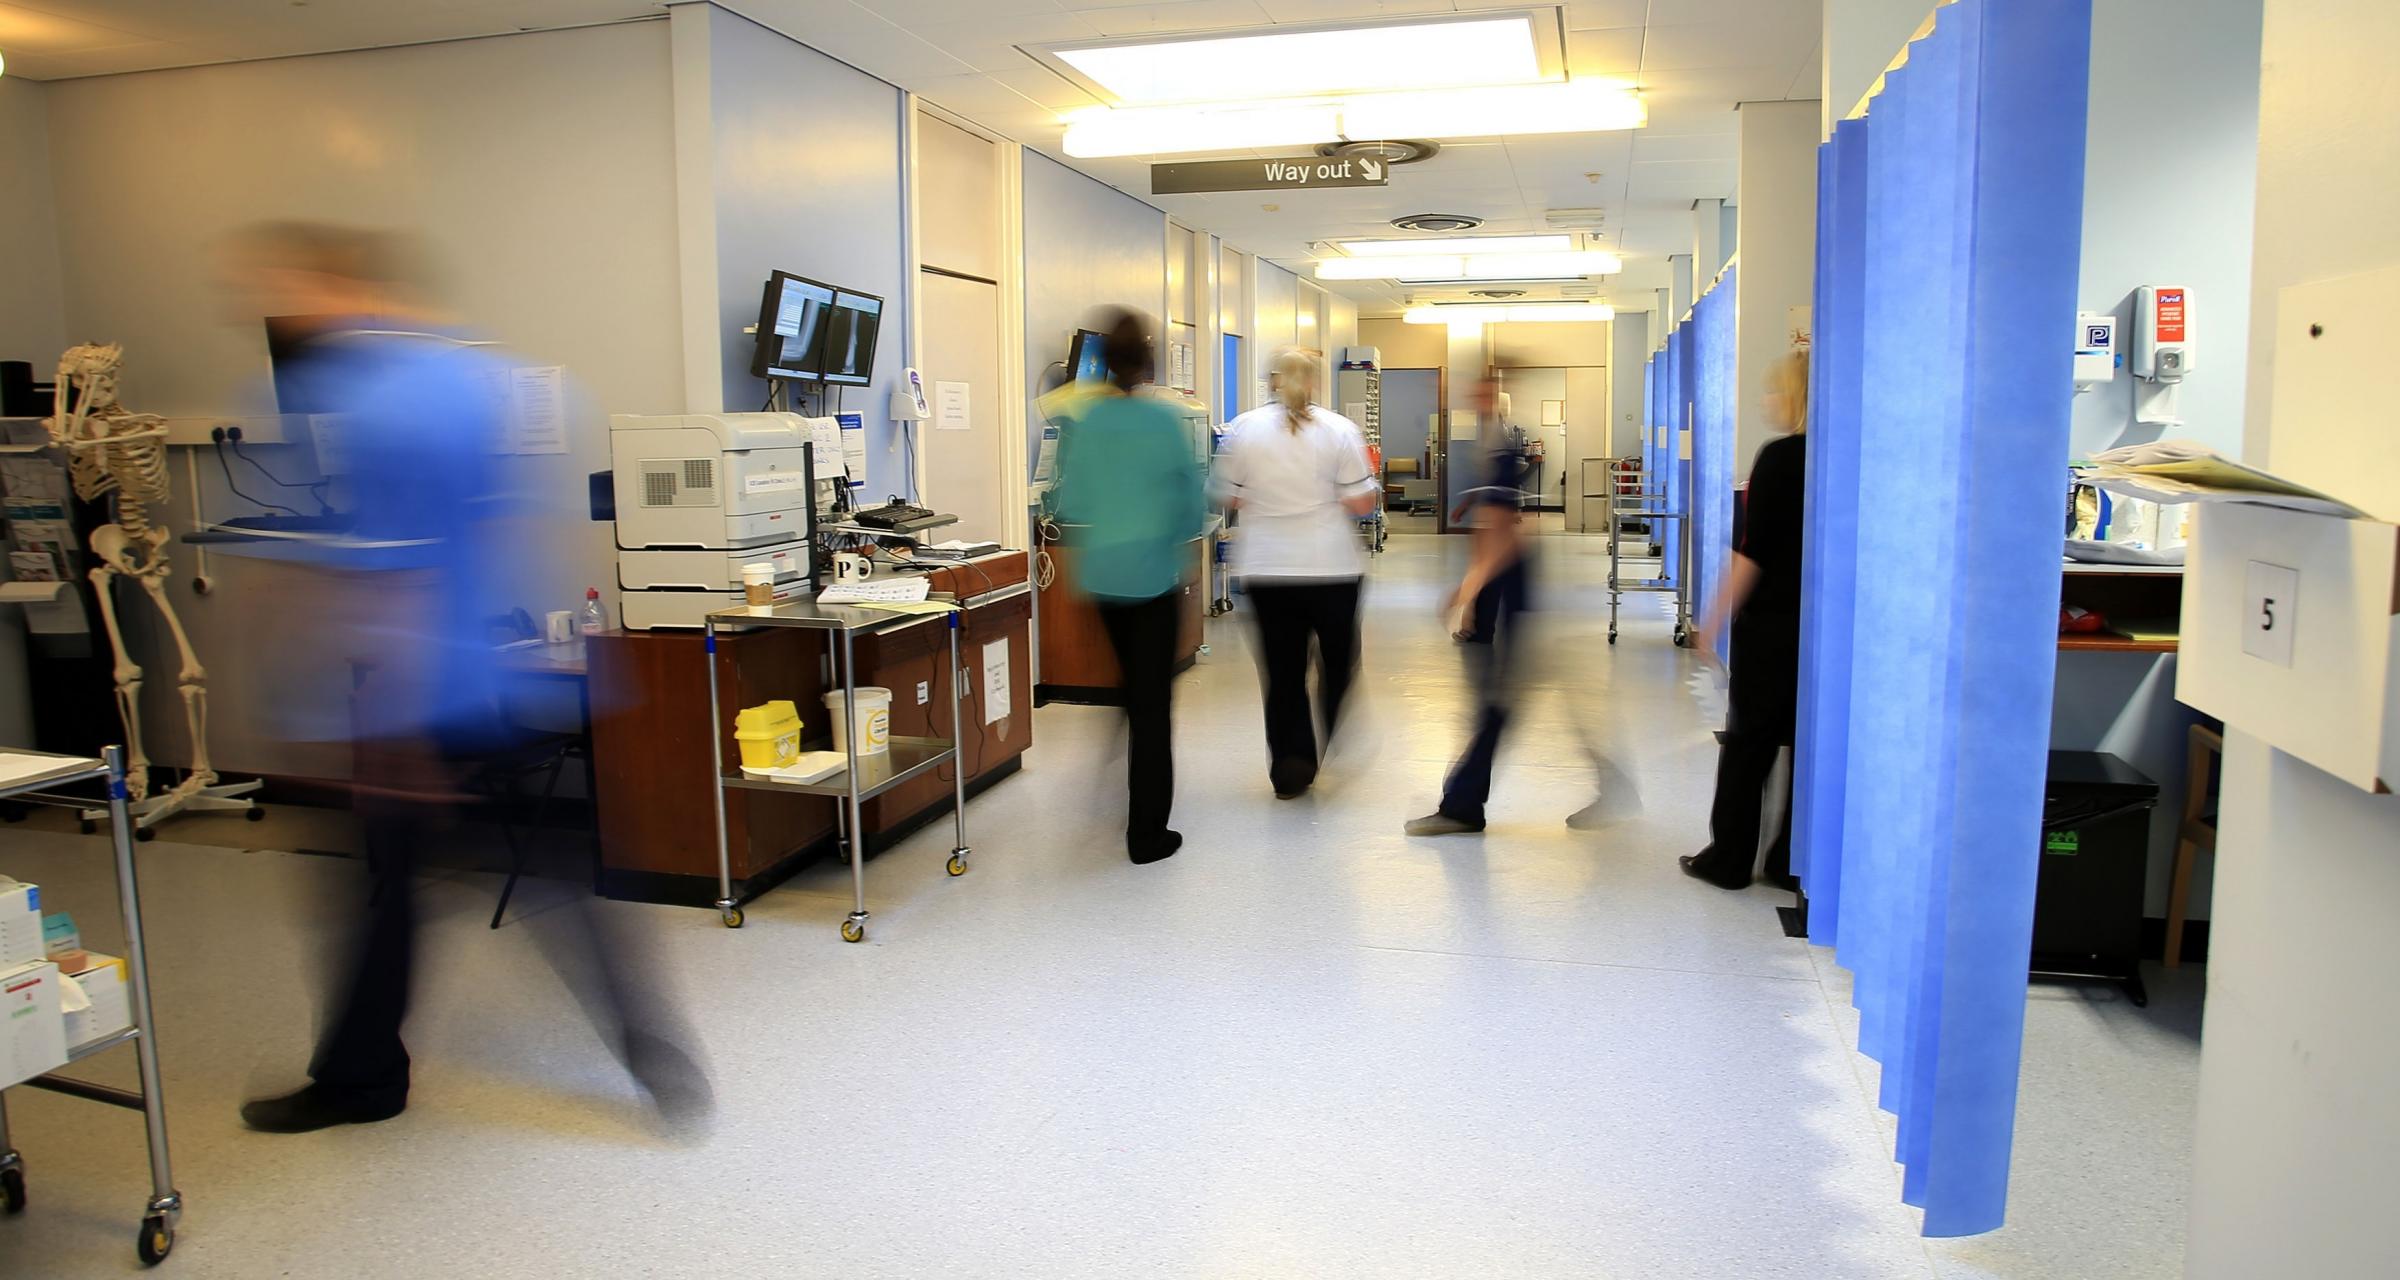 Is it wrong for the Scottish NHS to poach staff from poorer countries?